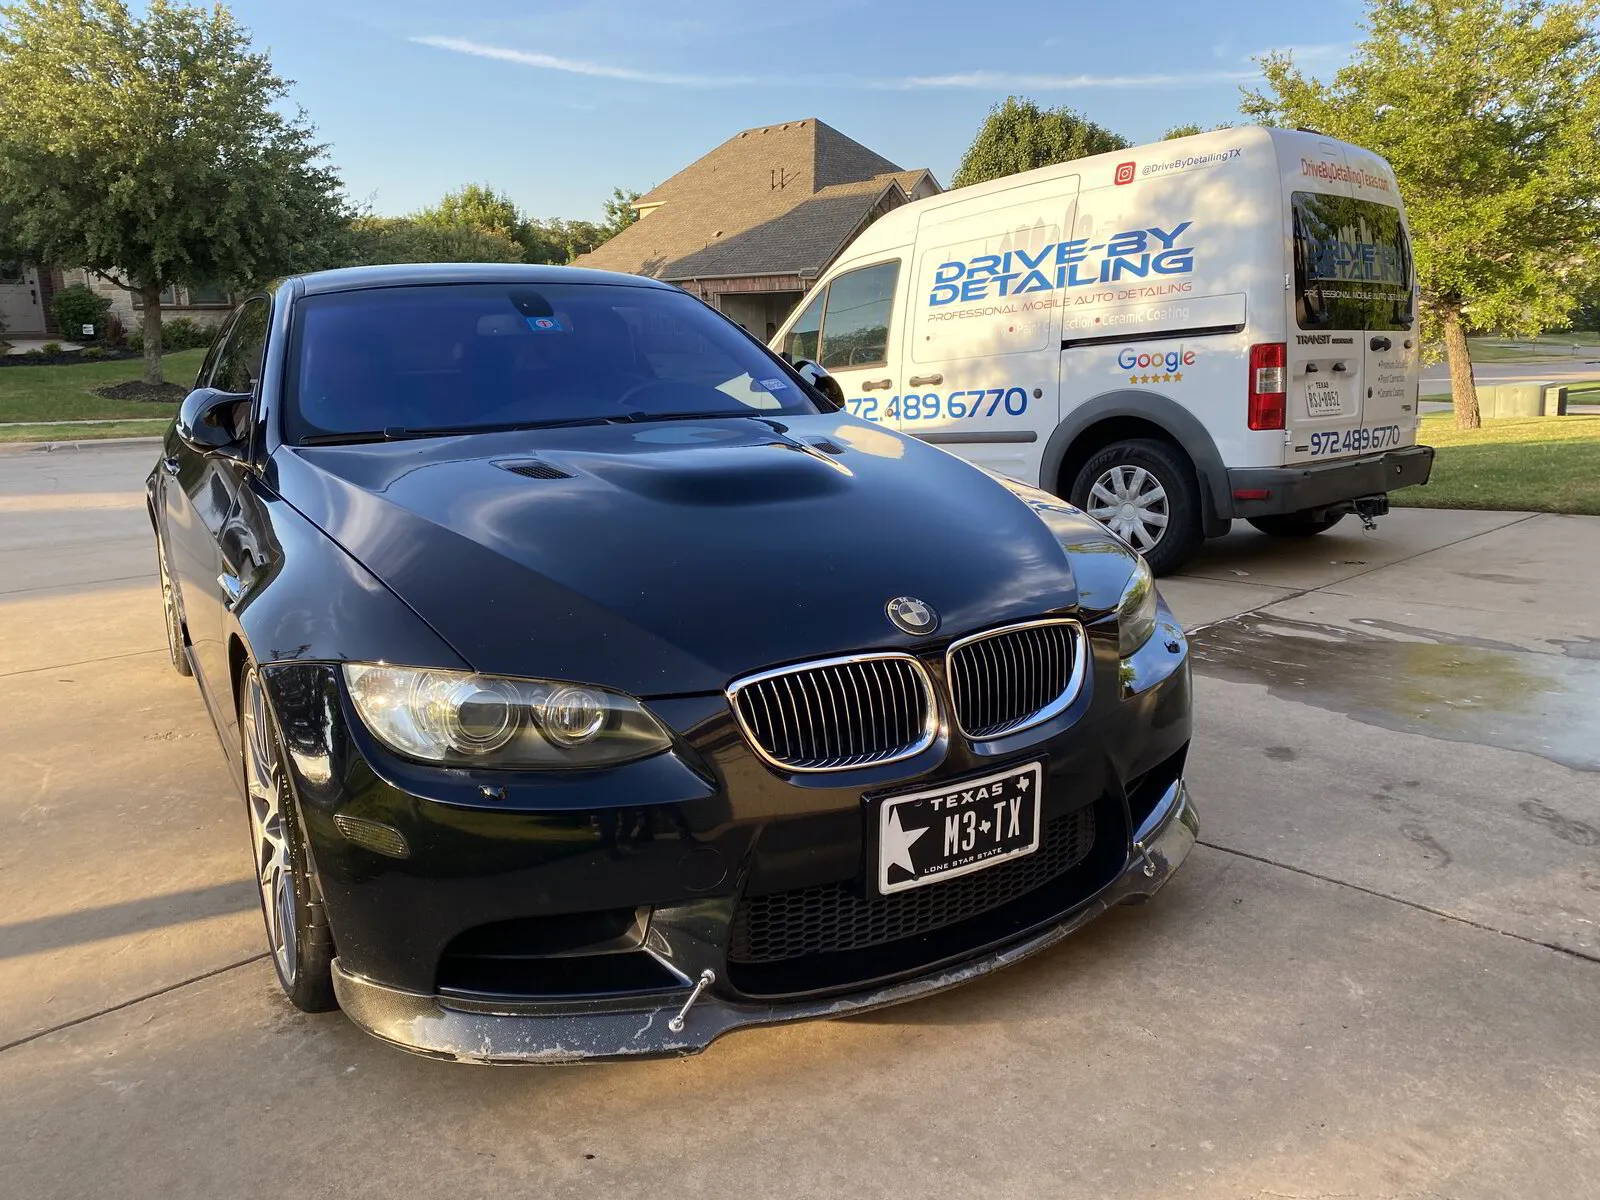 *Keywords for SEO Optimization:* mobile detailing Dallas TX, car detailing services, mobile detailing service, exterior detailing, interior cleaning, paint protection, window tinting, headlight restoration, skilled professionals, premium detailing products, customer satisfaction, book appointment.